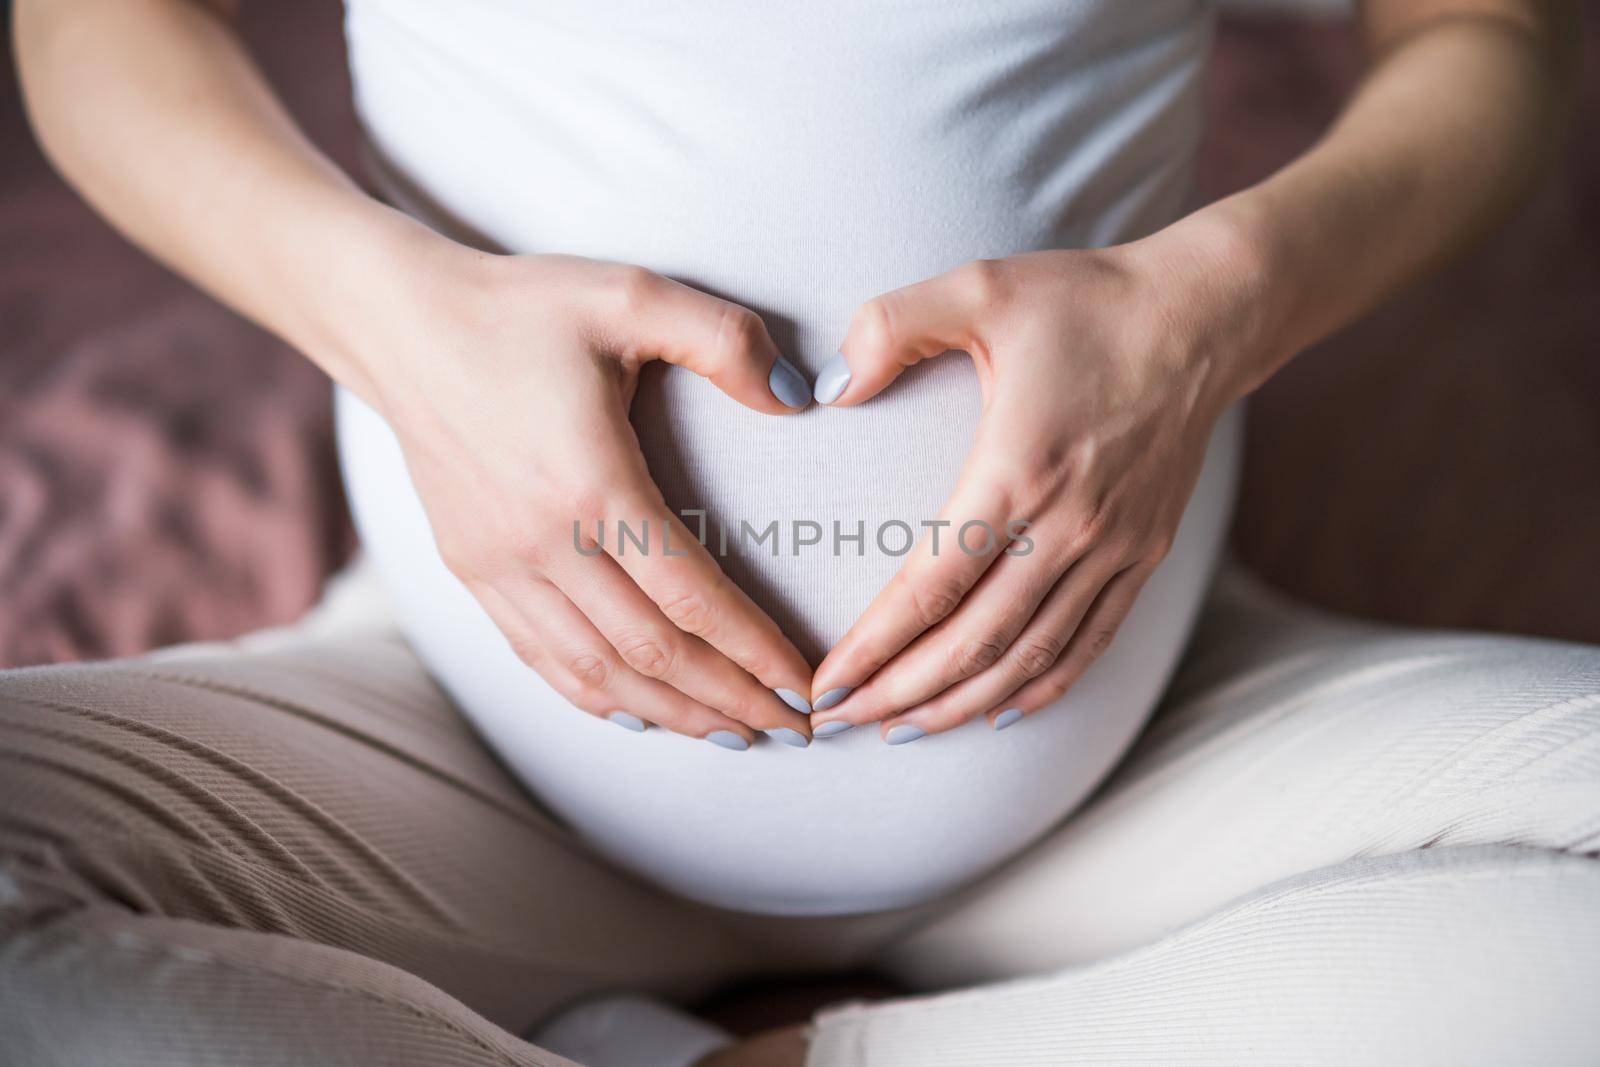 Pregnant woman relaxing at home. She is making heart shape on her stomach.